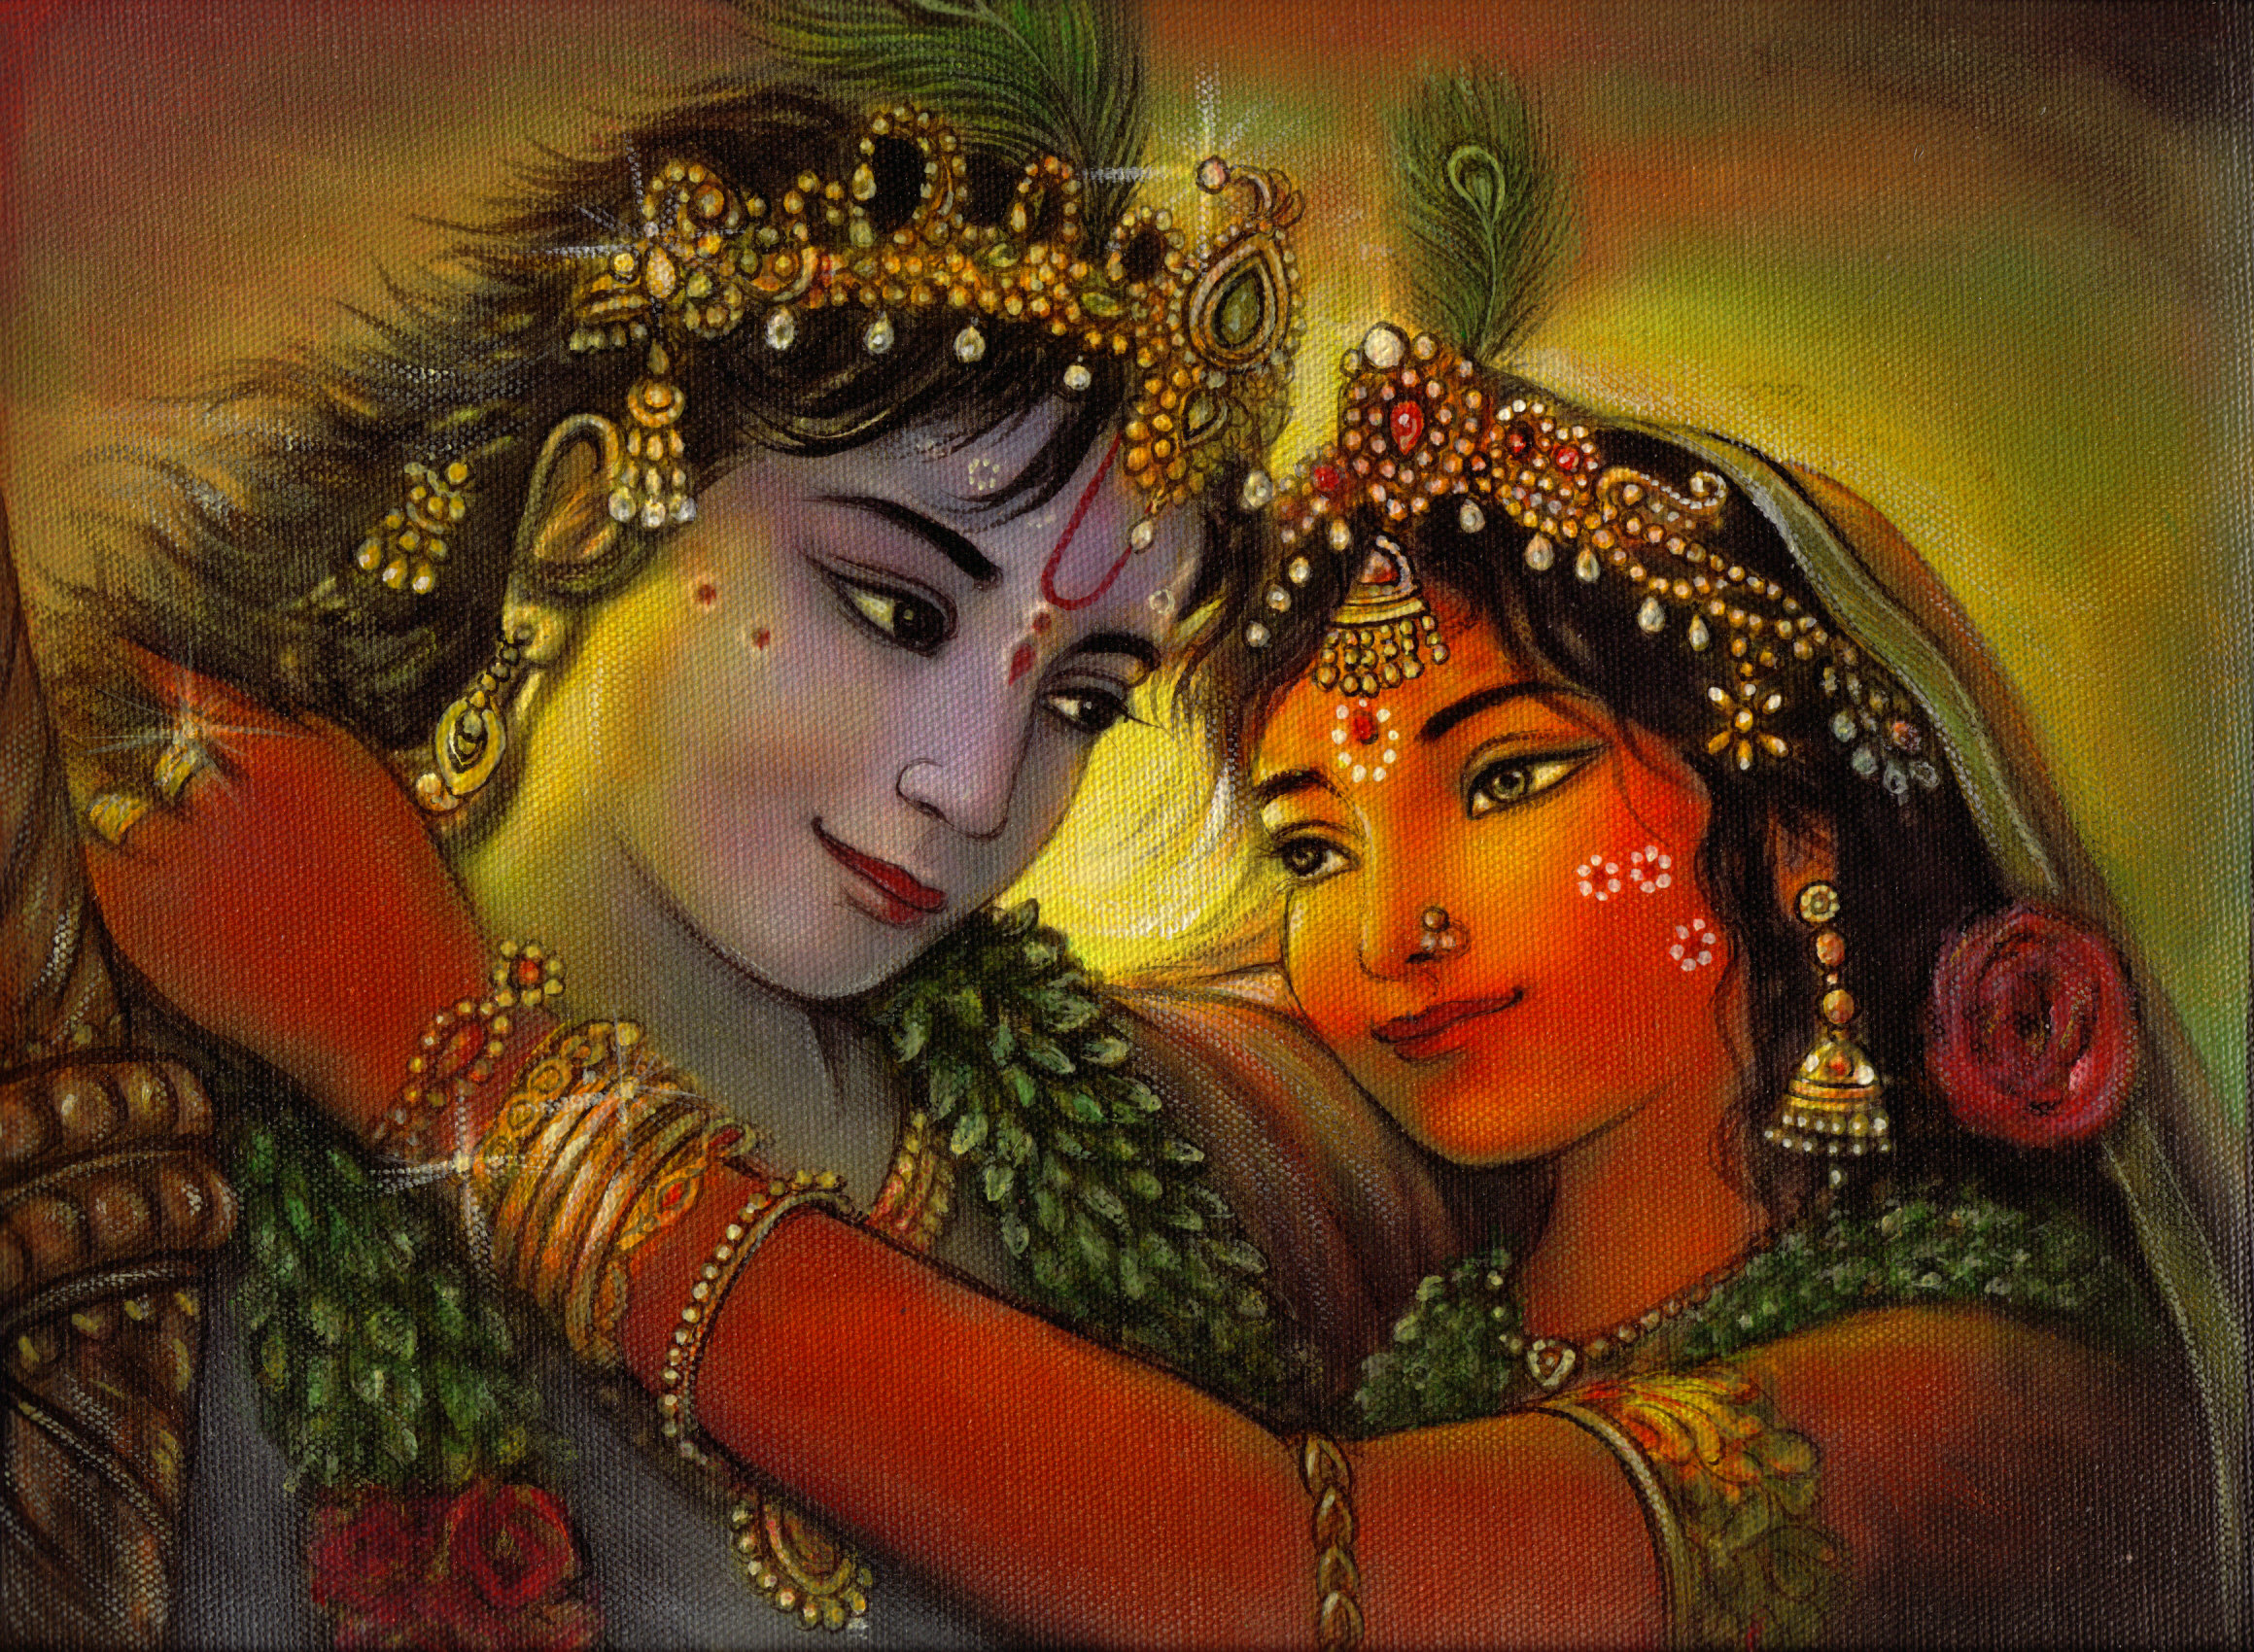 Radha Hold Out To Krishna Painting Wallpaper Wall Decor Poster For Living  Room No Framed Large Painting On Canvas Wall Art Picture For Home  Decoration Wall Decor Wall Painting  Photo 